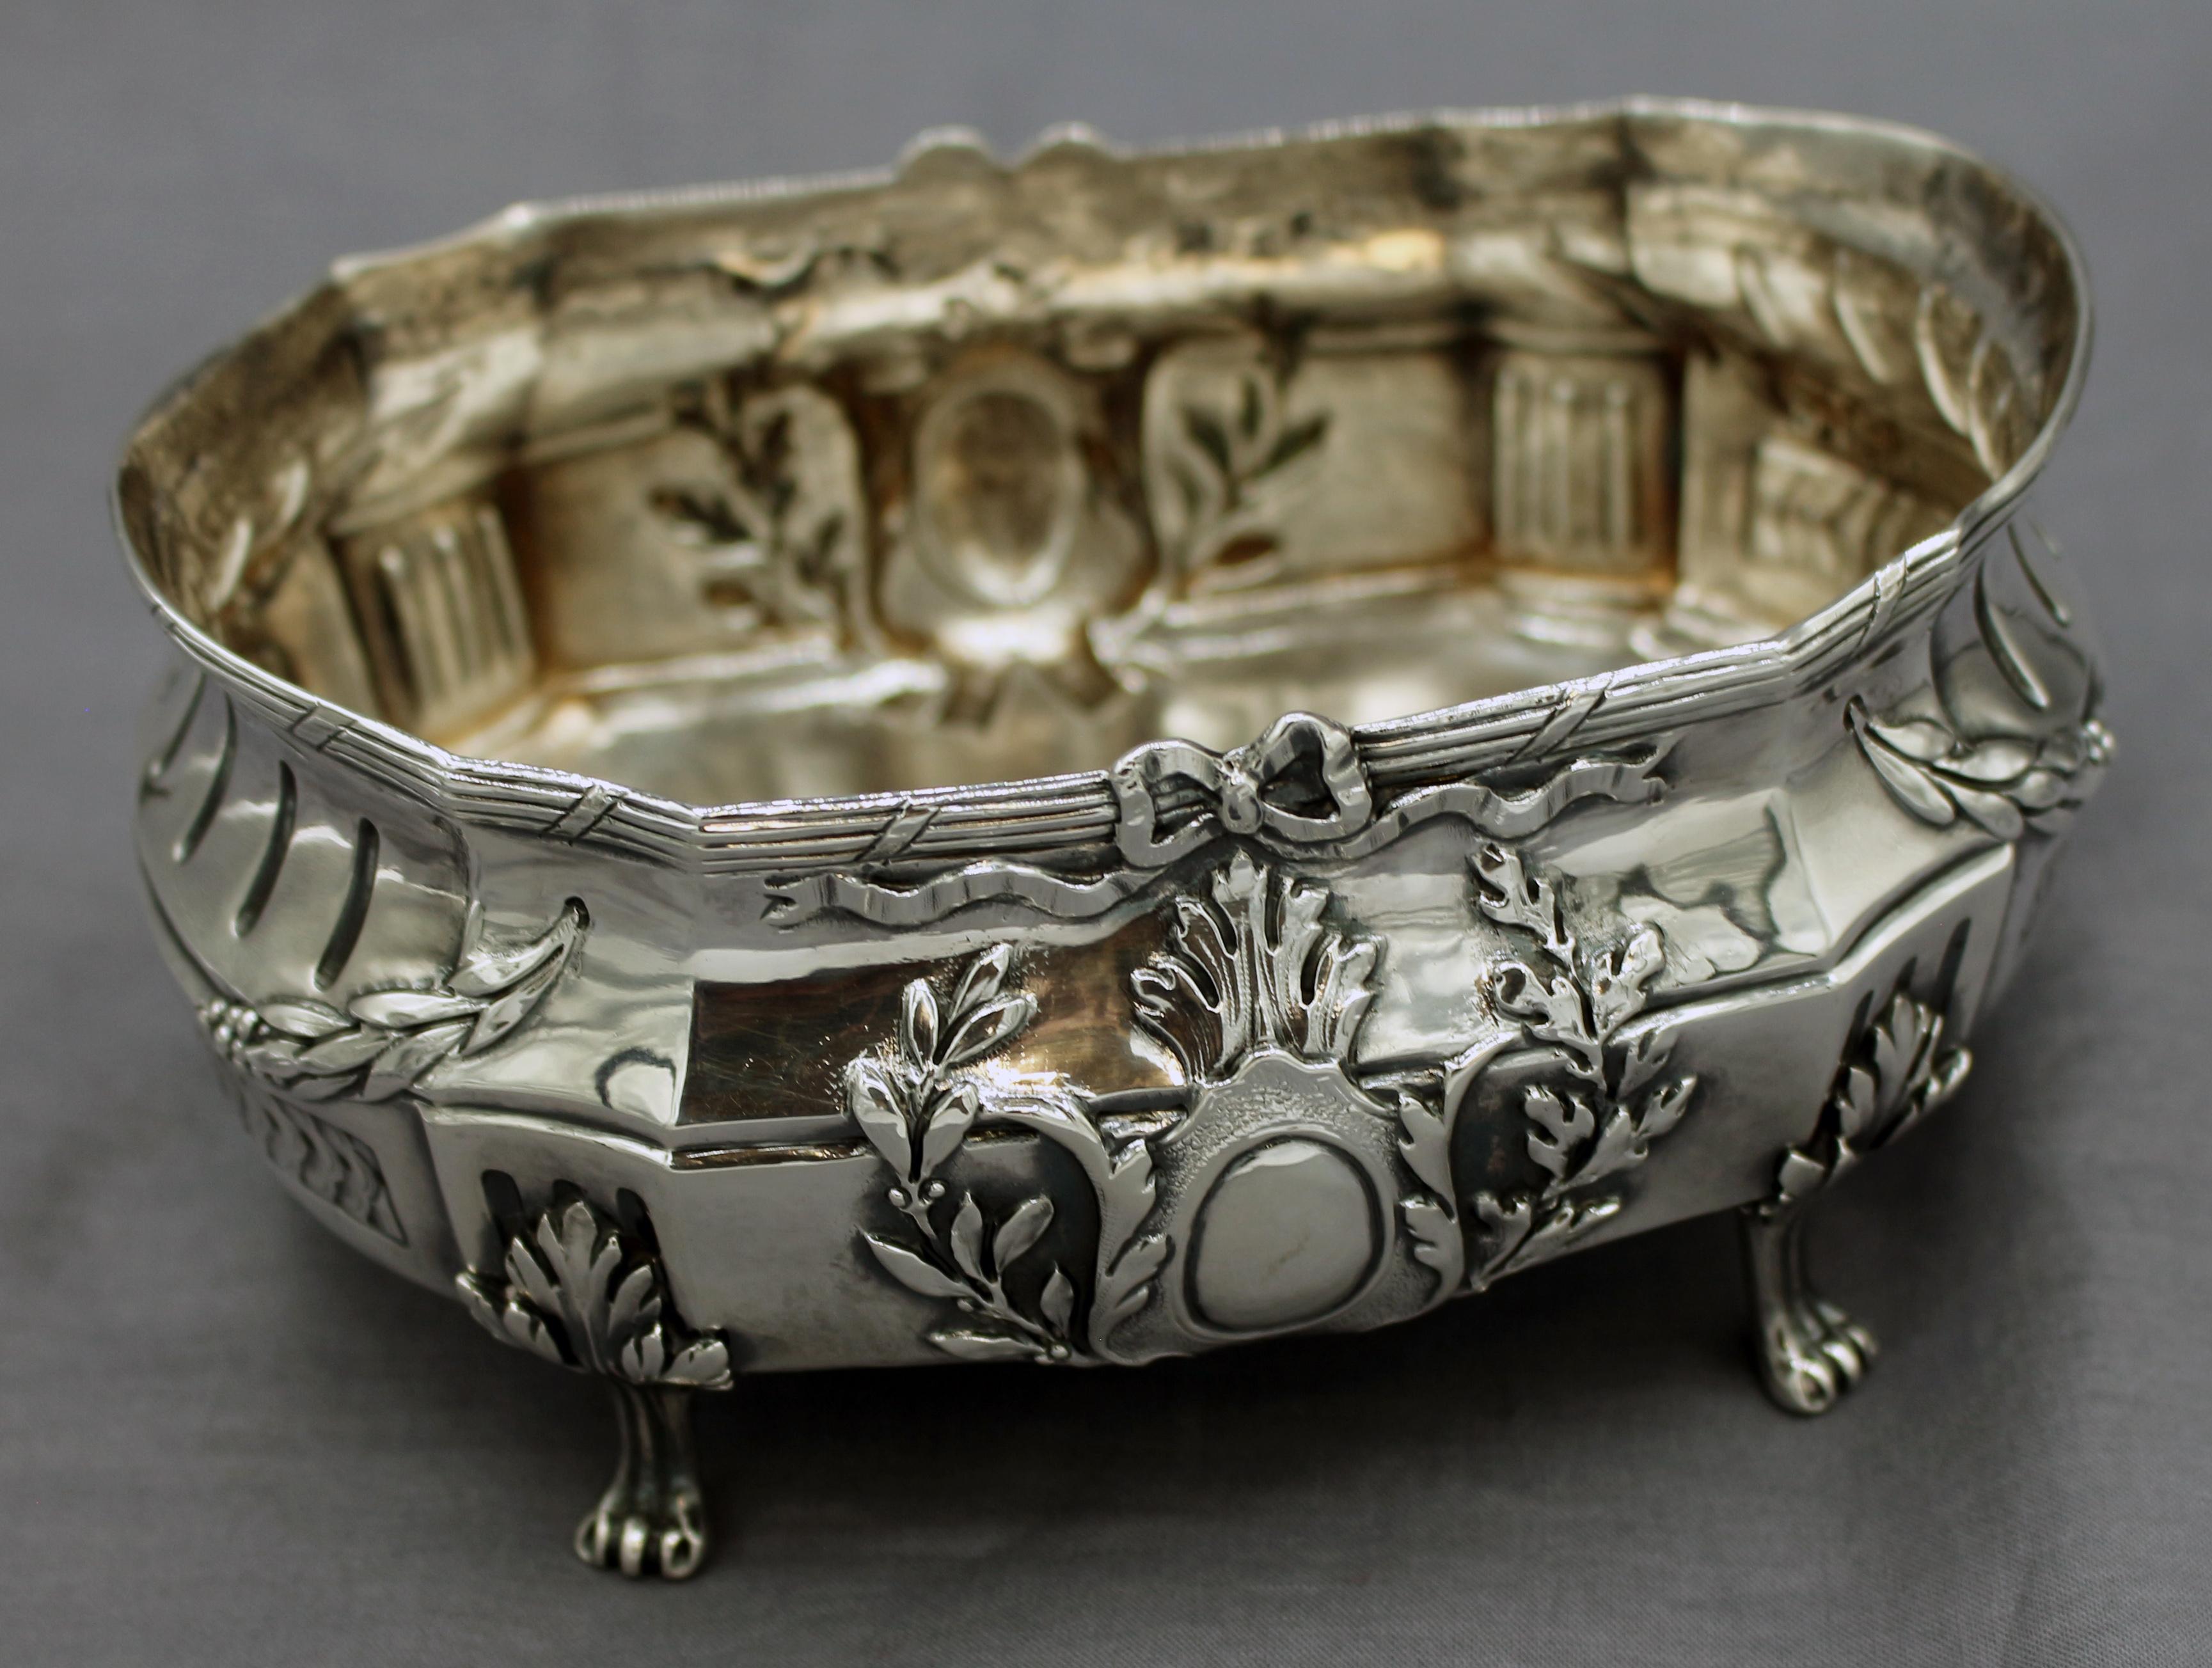 Parisian silver bowl. Footed, cartouche form with ribbon, leaf & berry motifs. French 1st standard .950 silver. Never engraved. Paw feet, circa 1880s, 8 troy oz. 6 1/8